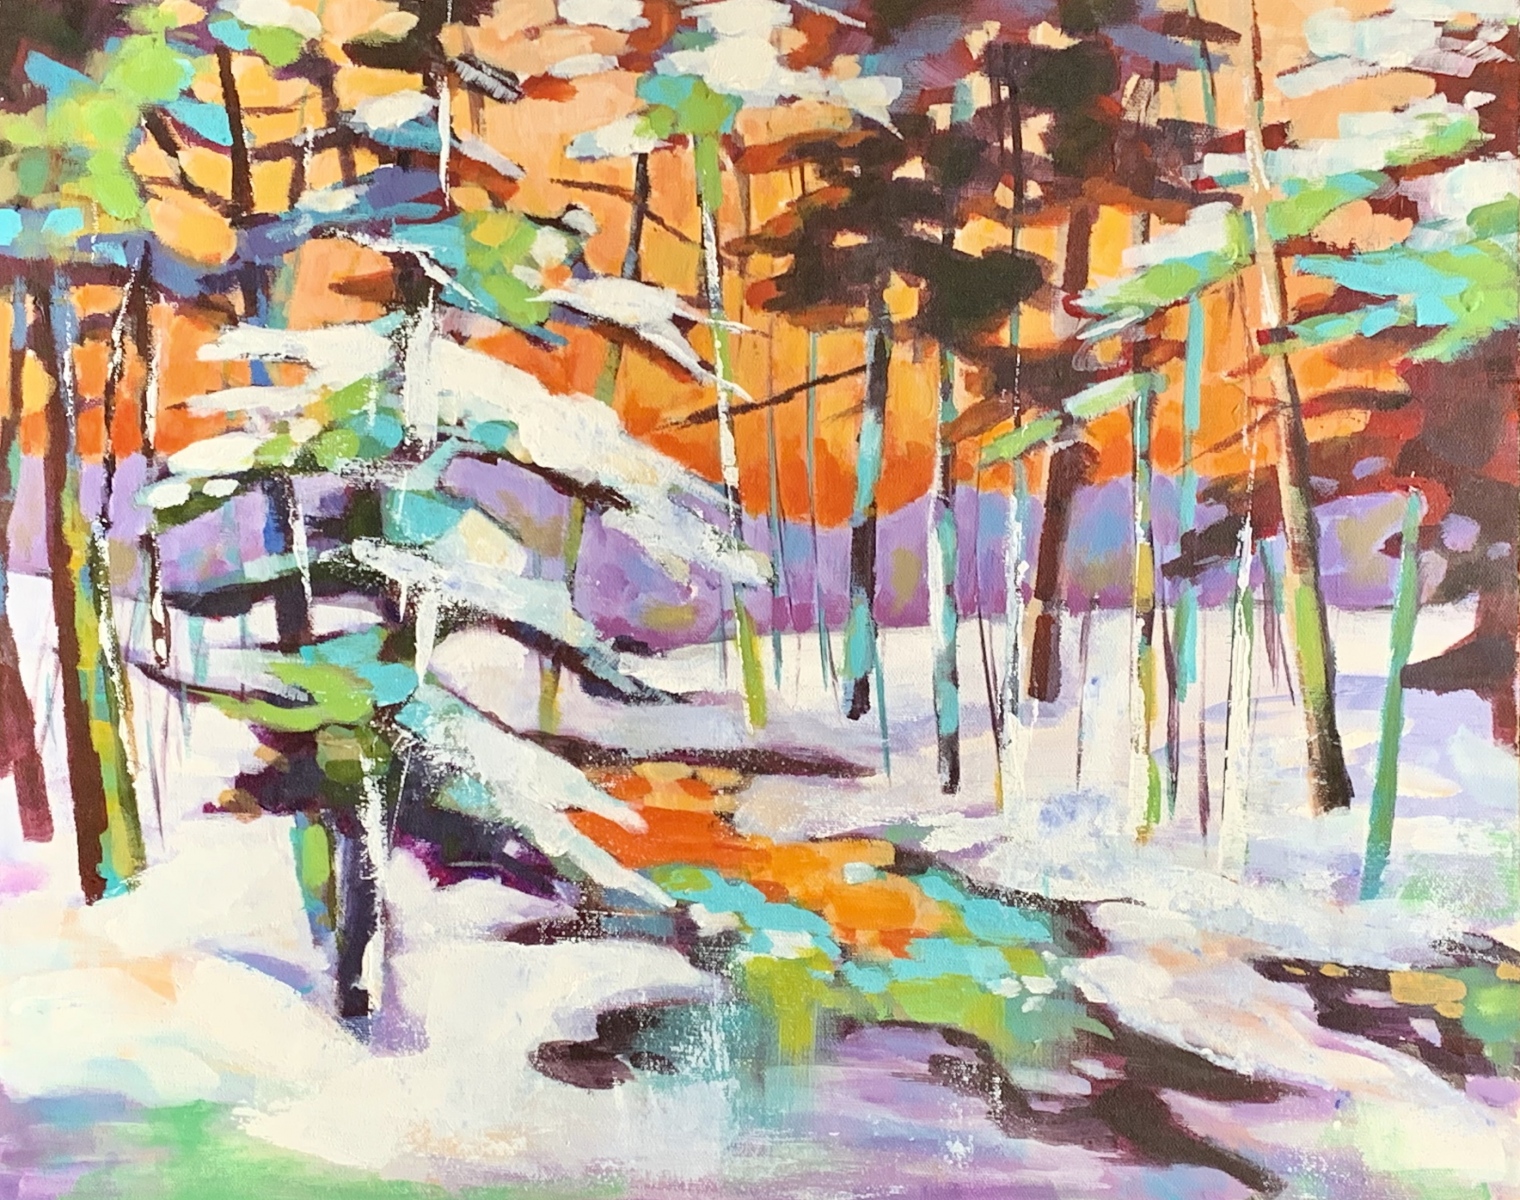 SOLD - COLOUR IN WINTER